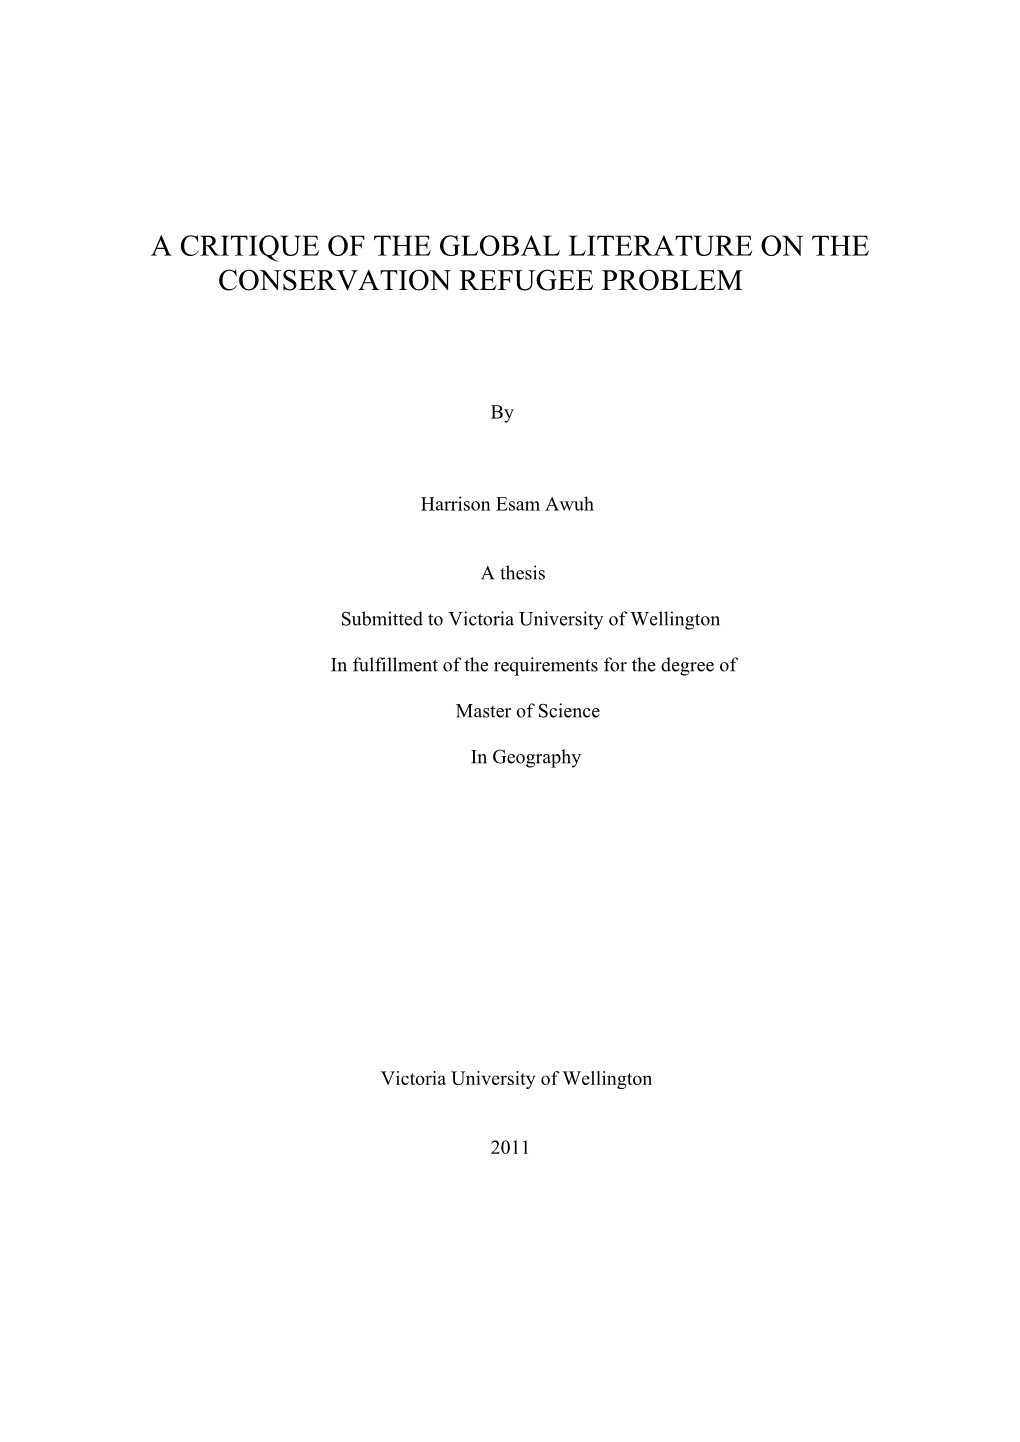 A Critique of the Global Literature on the Conservation Refugee Problem